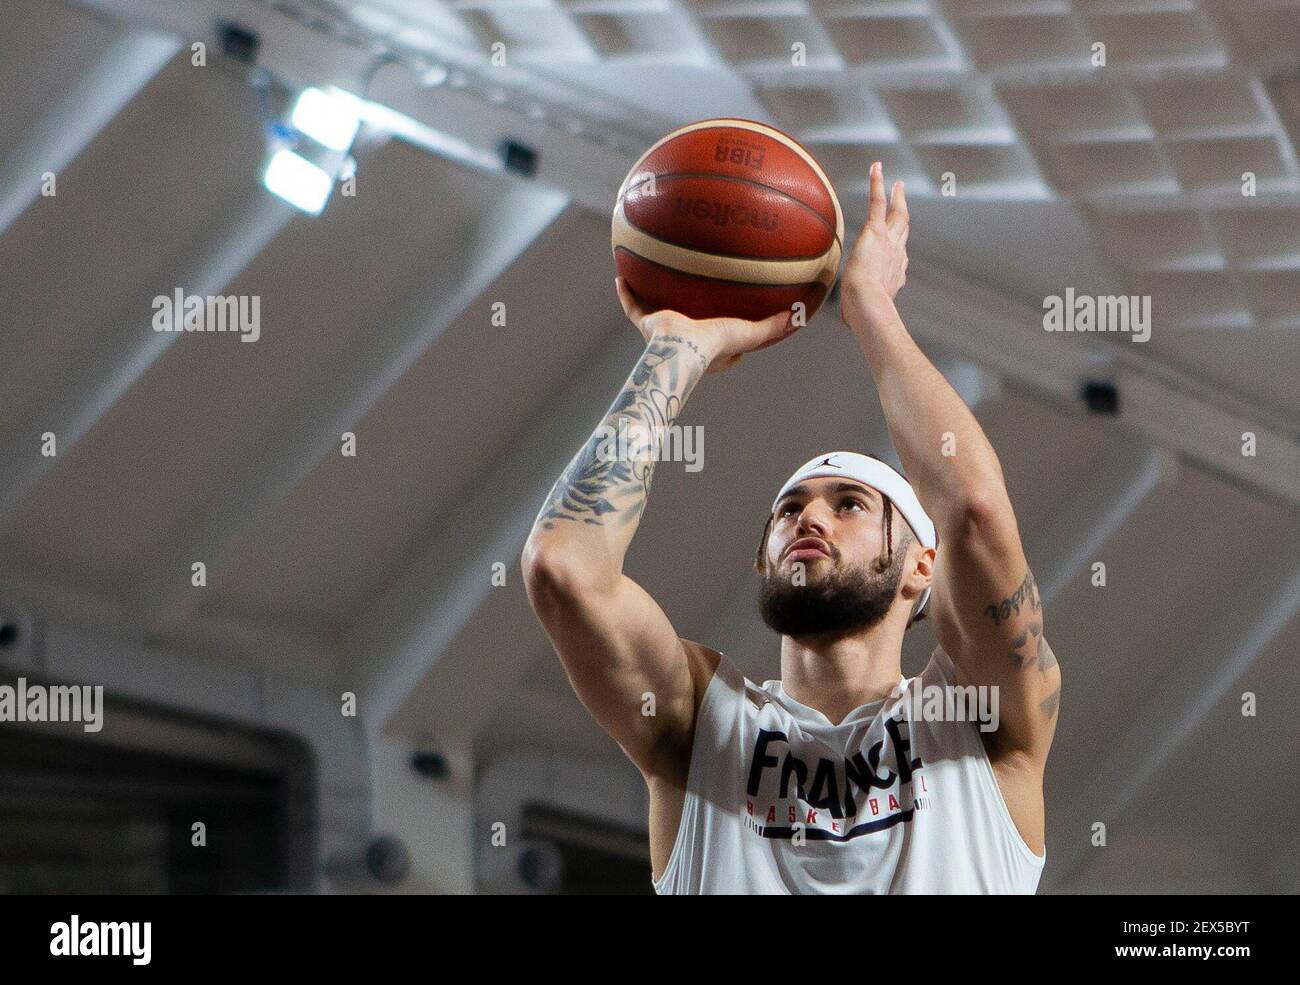 Podgorica, Montenegro. 20th February, 2021. Isaia Cordinier of France warms up. Credit: Nikola Krstic/Alamy Live News Stock Photo